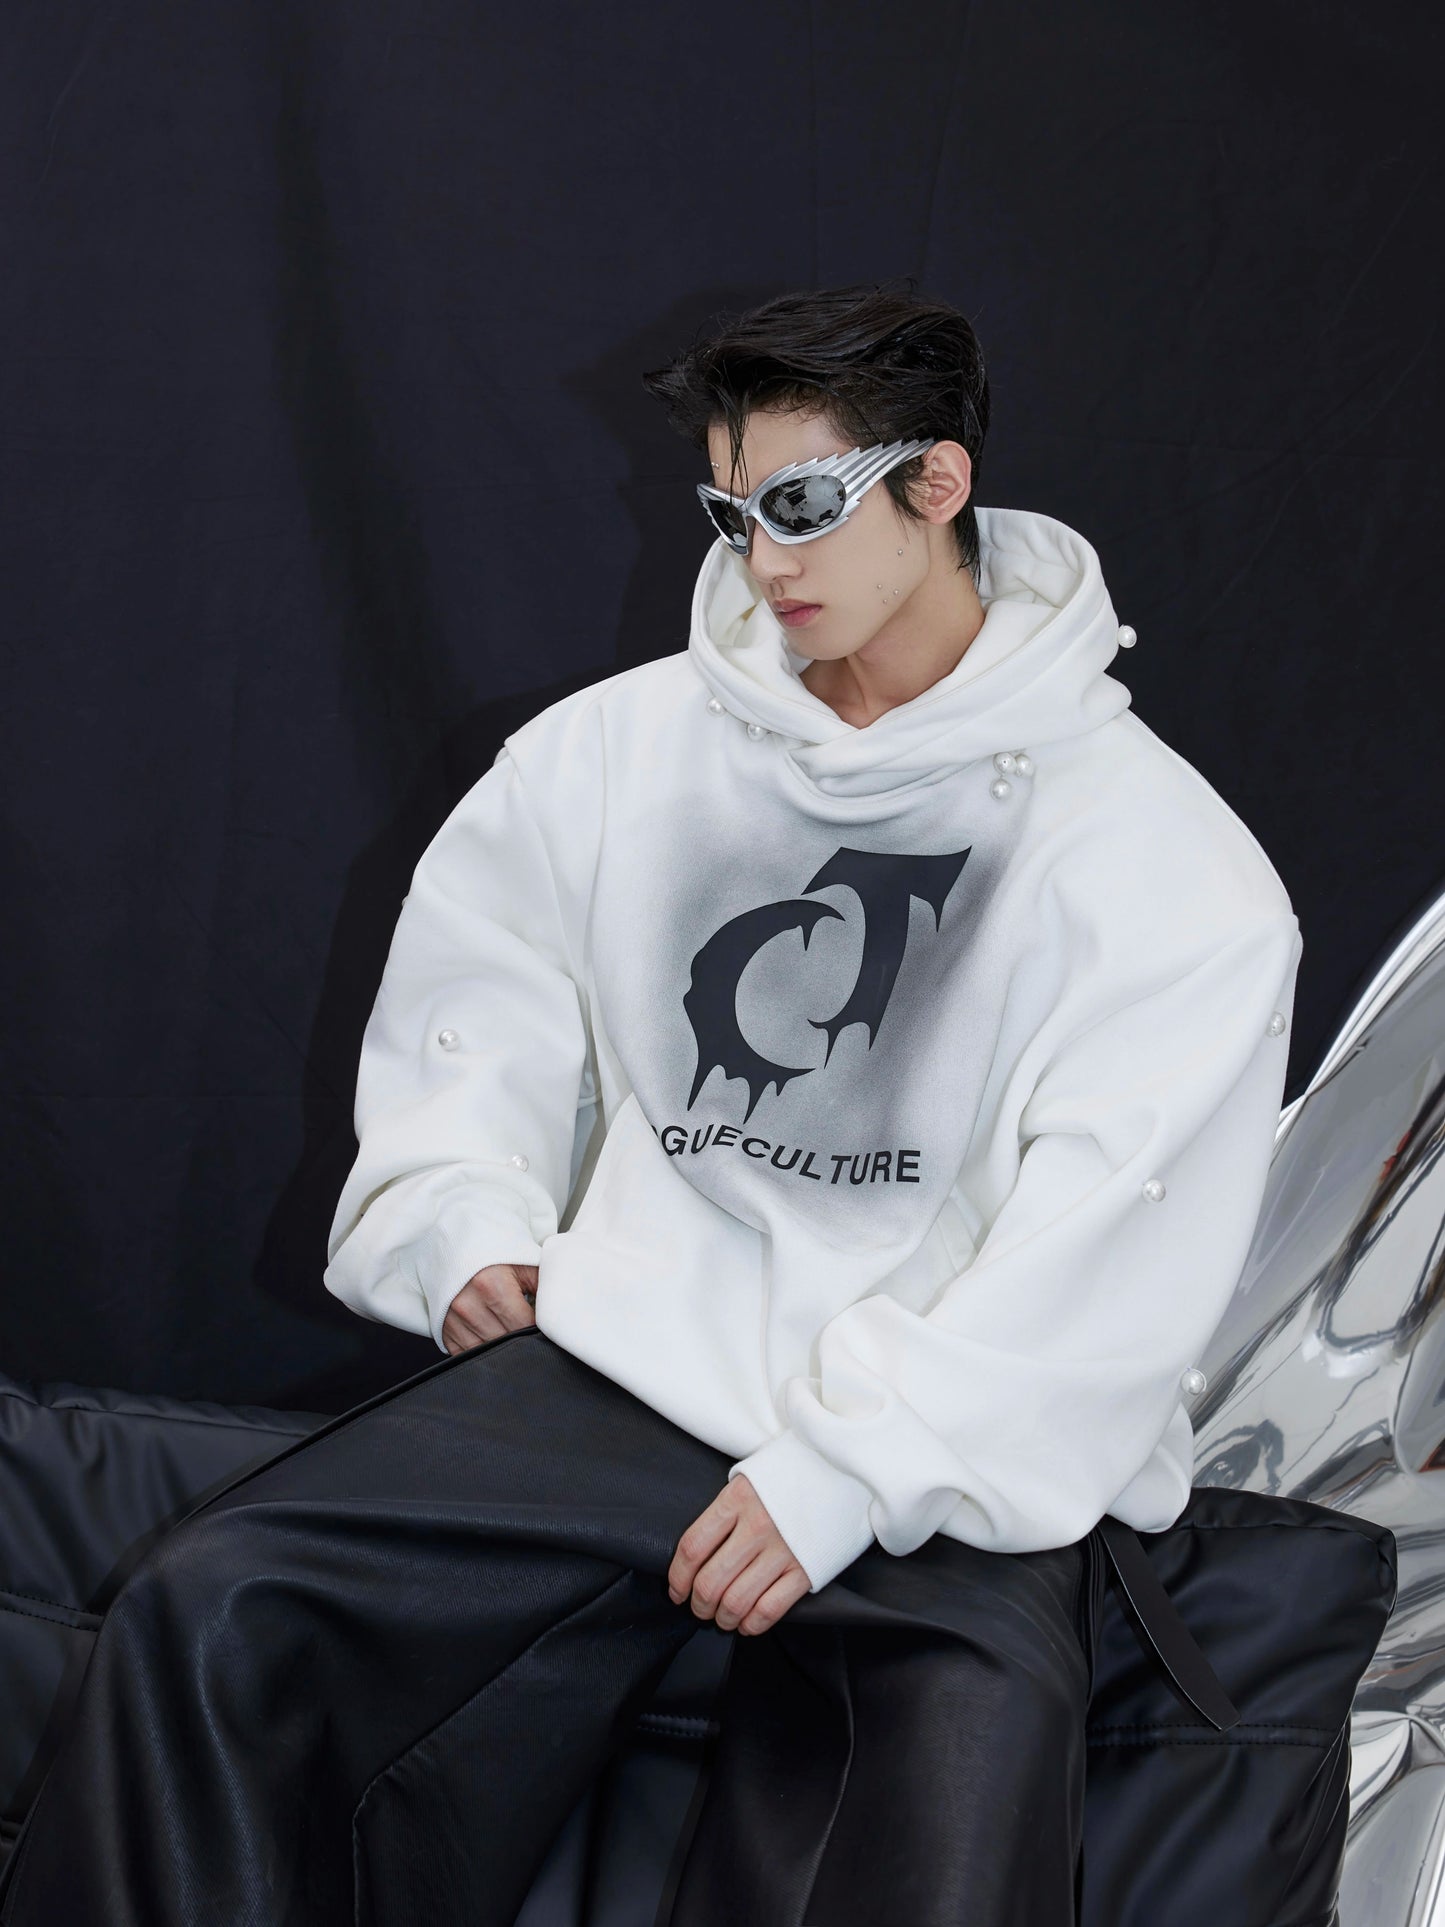 CulturE Fall/Winter Blockbuster pearl-embellished hooded sweatshirt with logo spray painting and fleece silhouette top